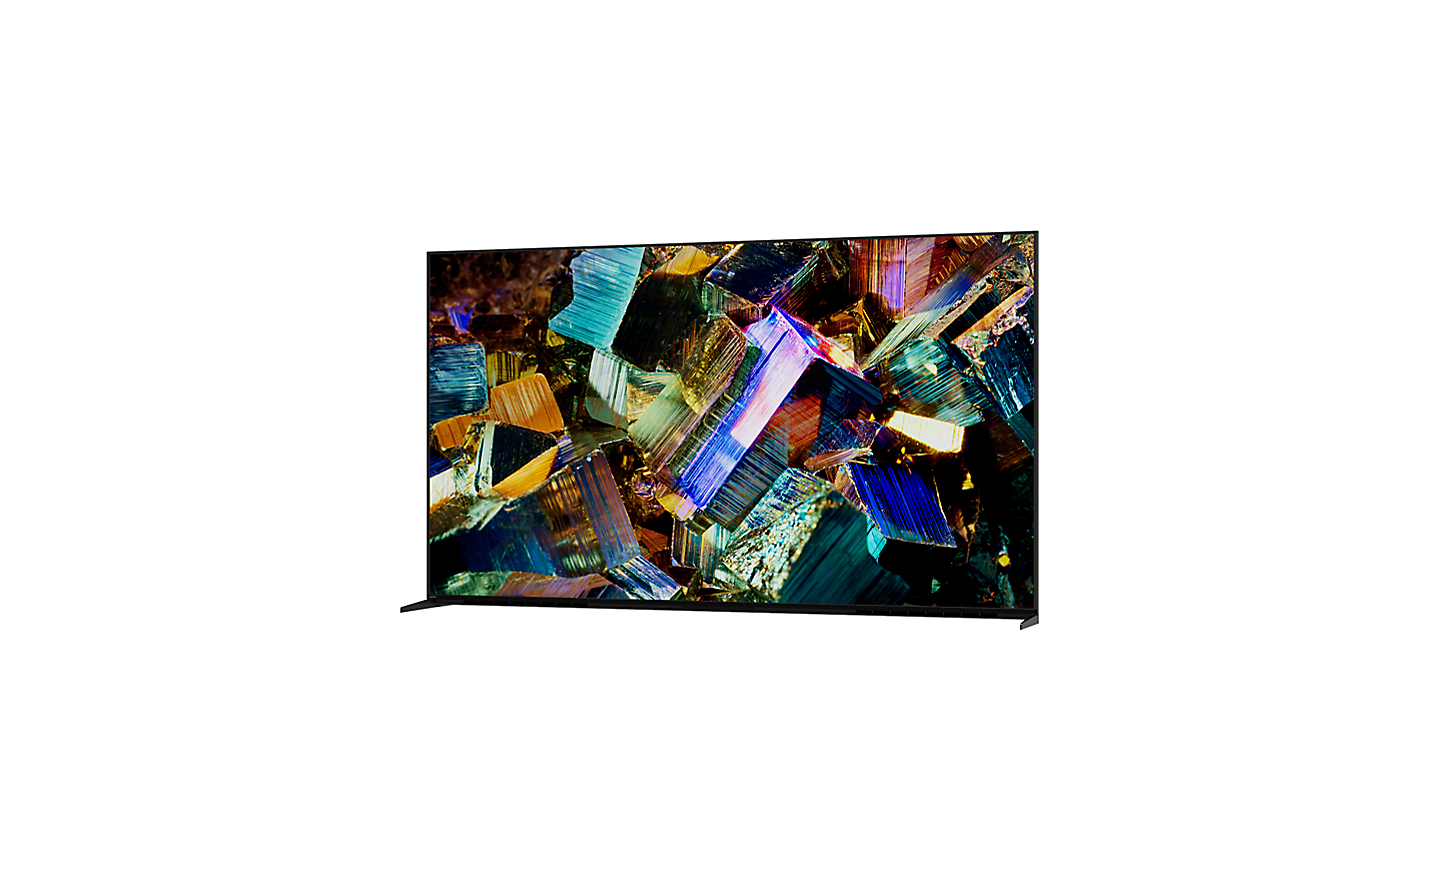 Slideable 360 viewer for Z9K Series showing 360° view of TV and screenshot of multicoloured crystals